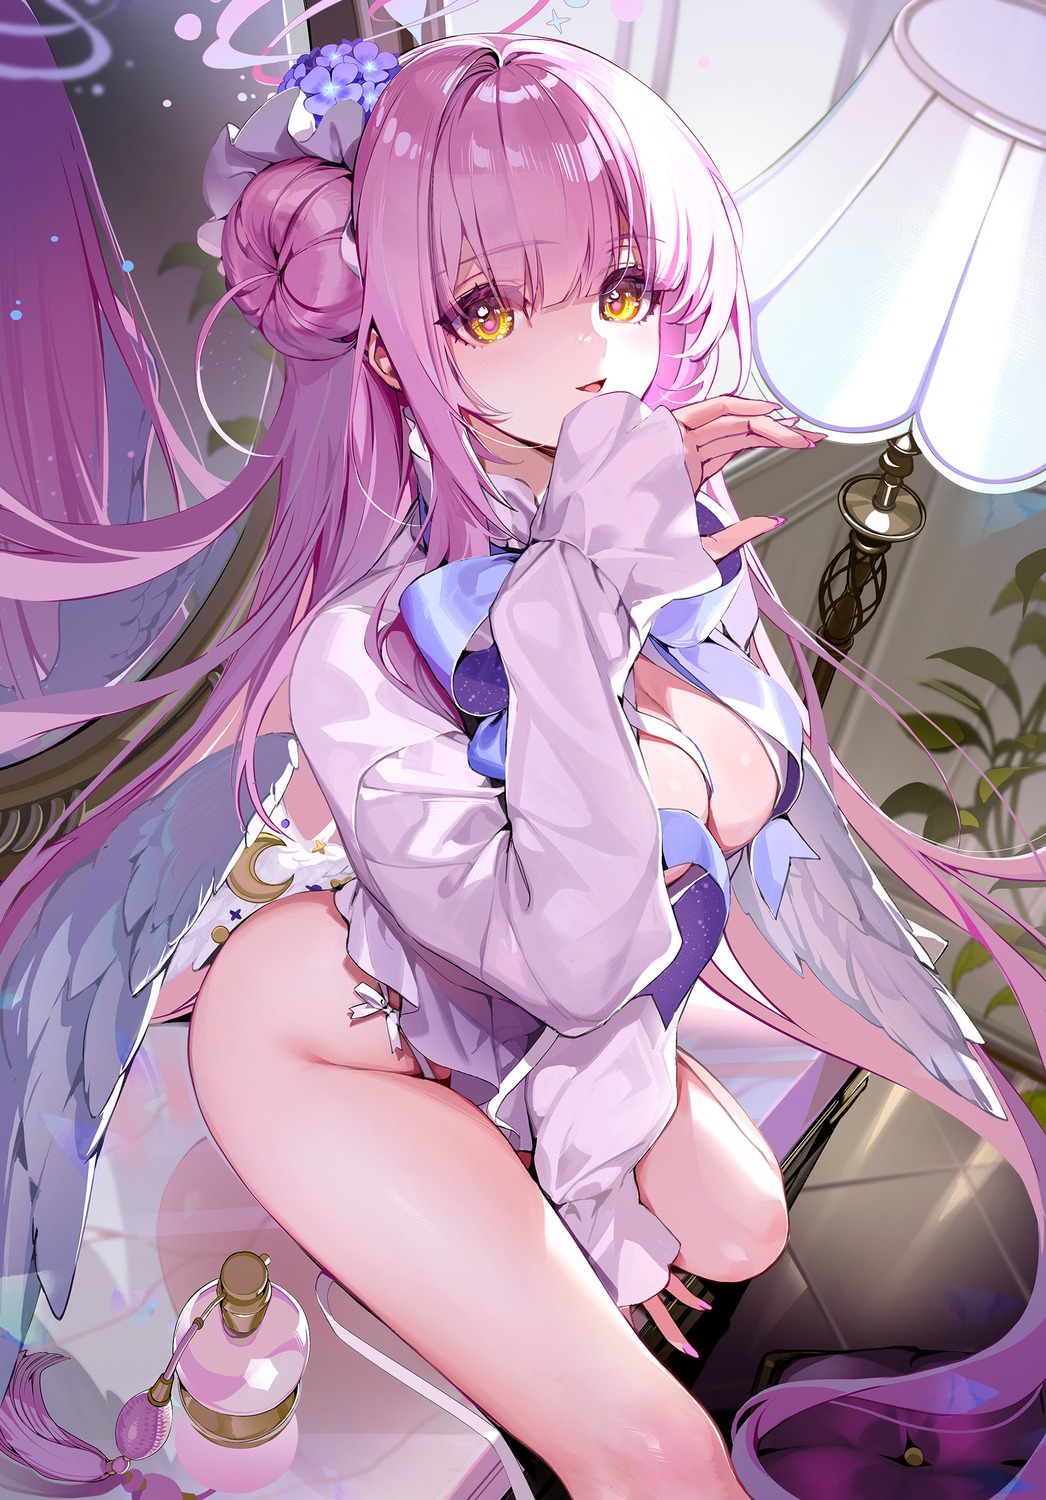 Anime 1046x1500 Misono Mika Blue Archive anime girls long hair pink hair yellow eyes hairbun lamp looking at viewer sitting thighs big boobs anime girl with wings leaves portrait display mirror reflection AkiZero smiling perfume tile floor wings